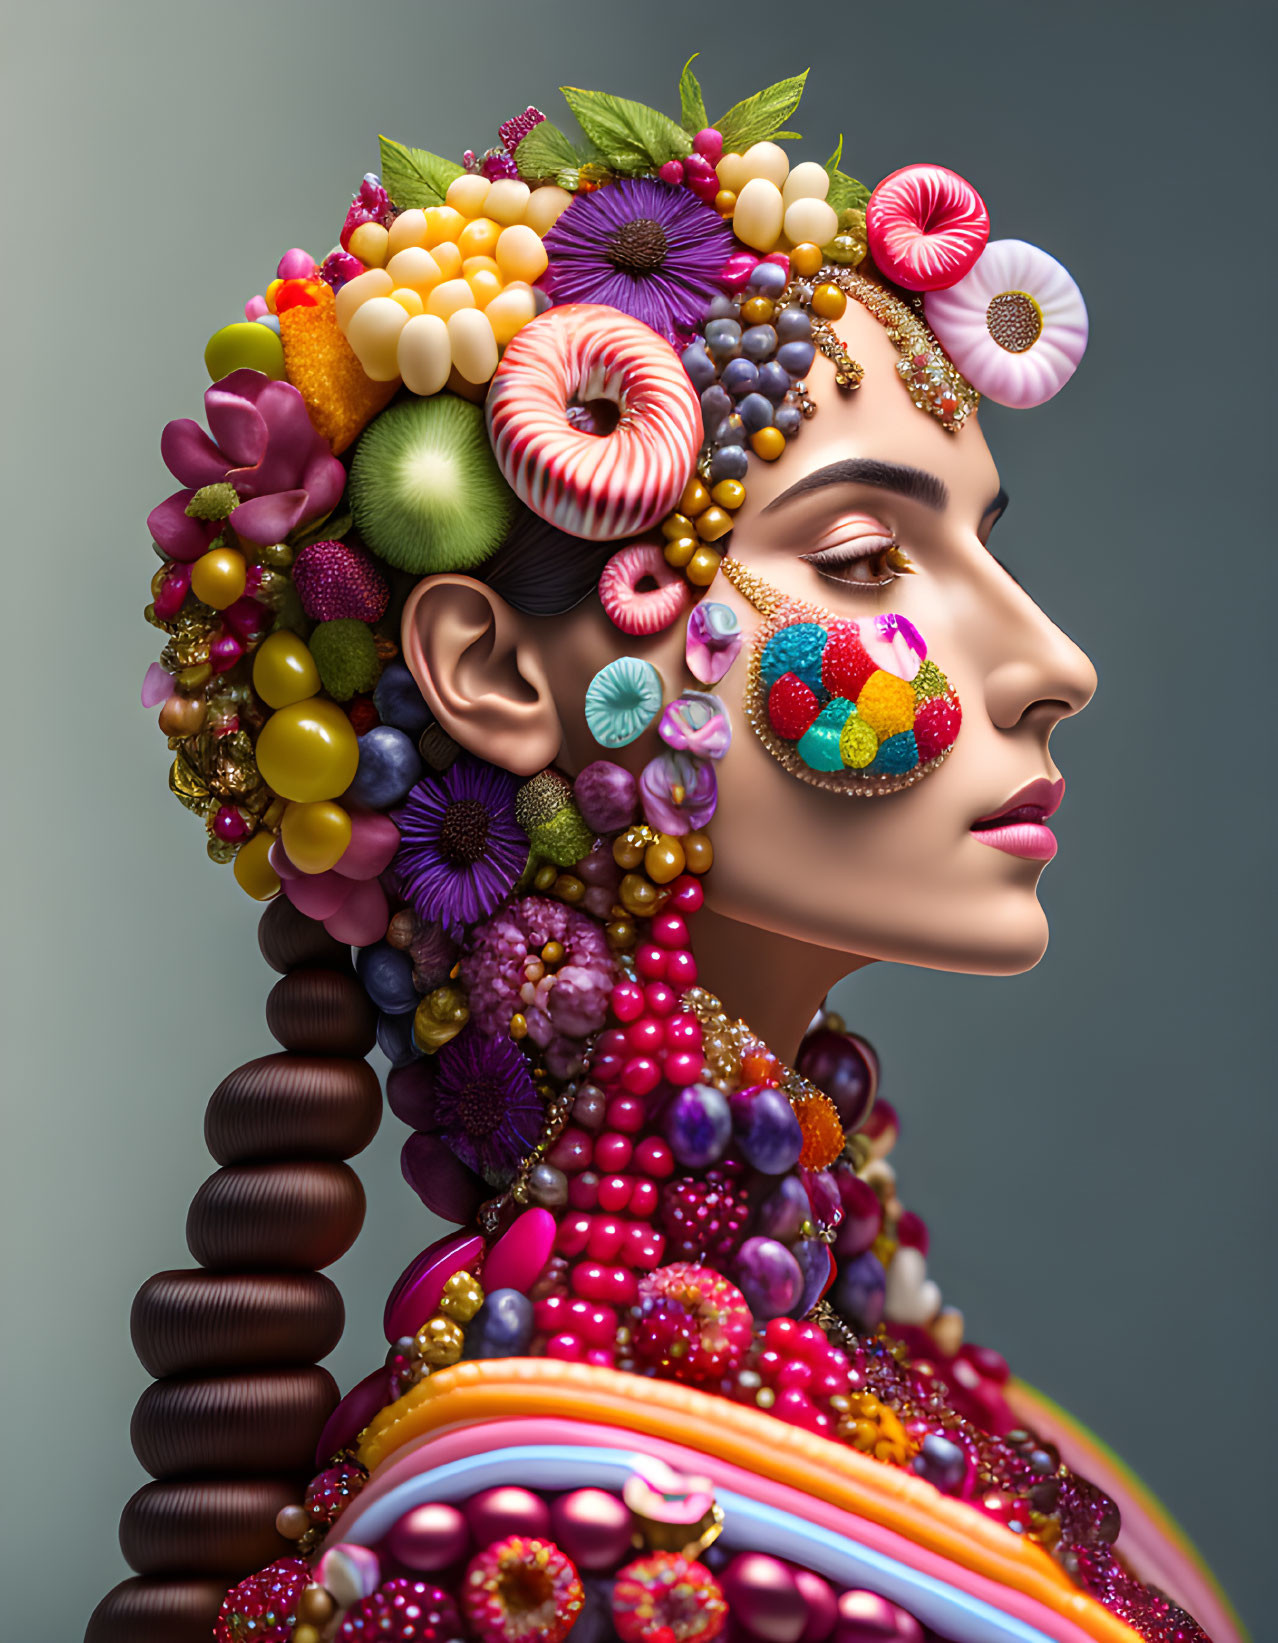 Vibrant artwork featuring woman adorned with colorful fruits, flowers, and candies